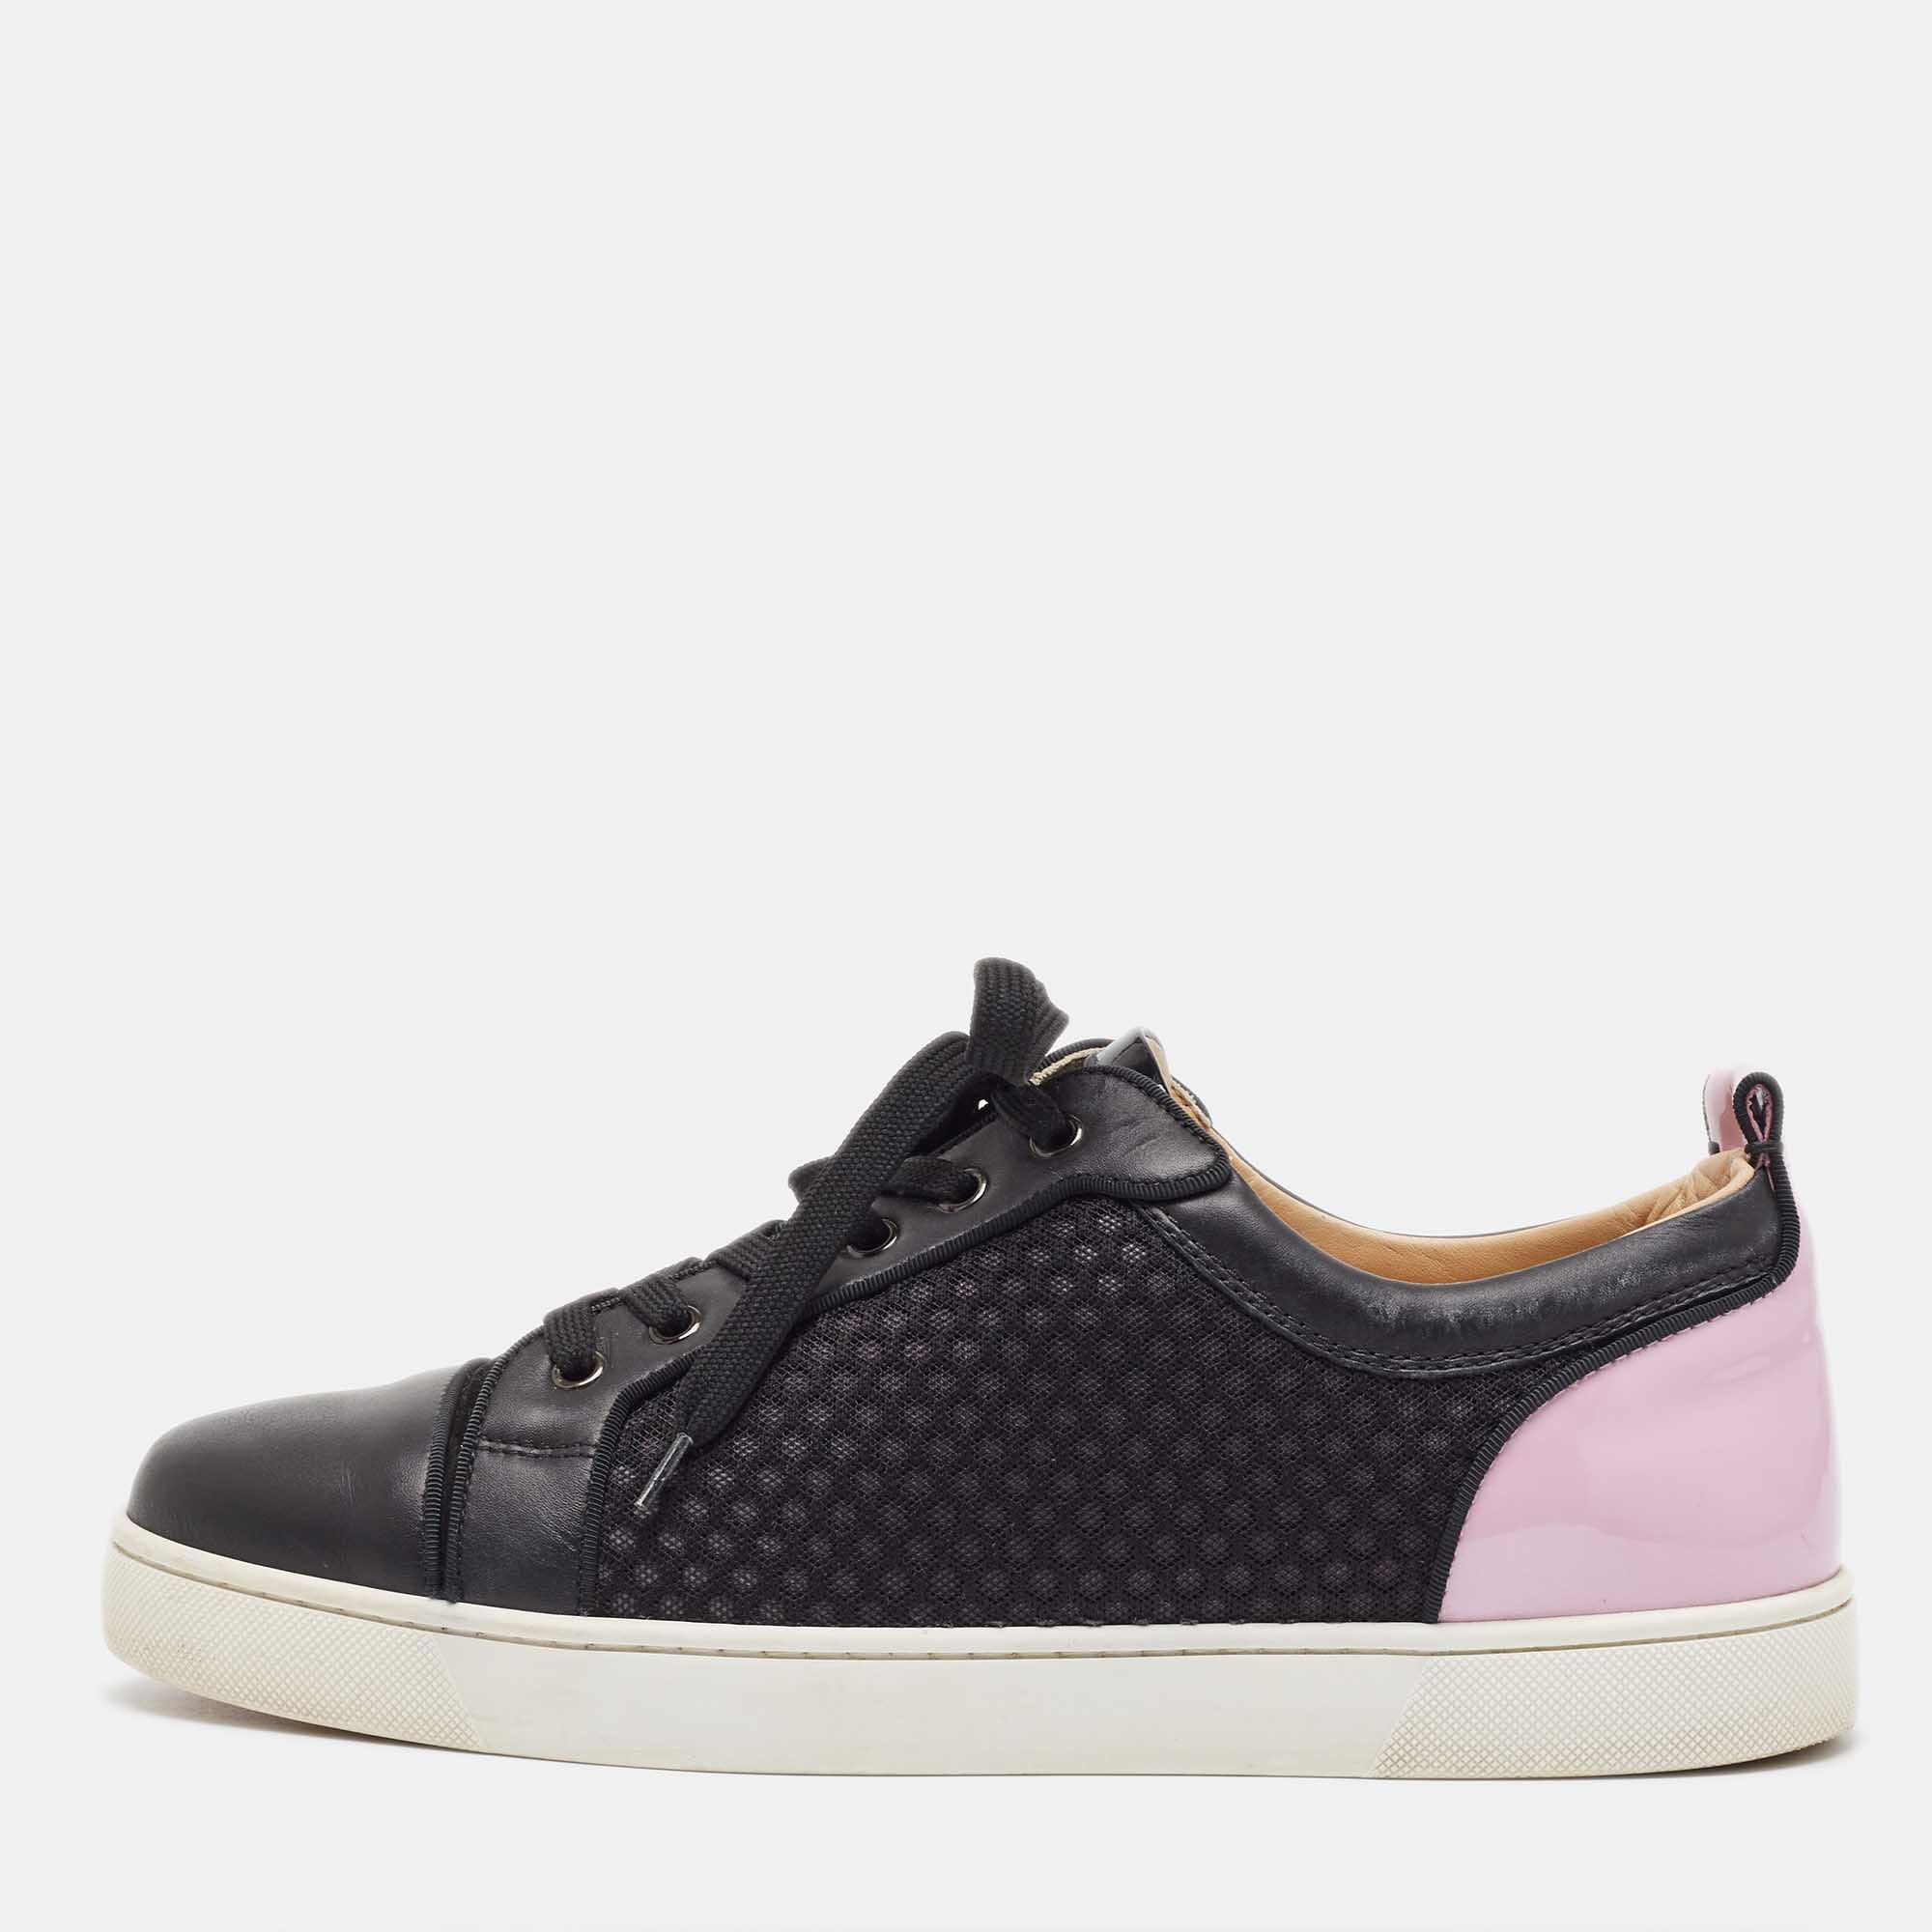 Christian Louboutin Black/Pink Patent And Mesh Low Top Sneakers Size 44